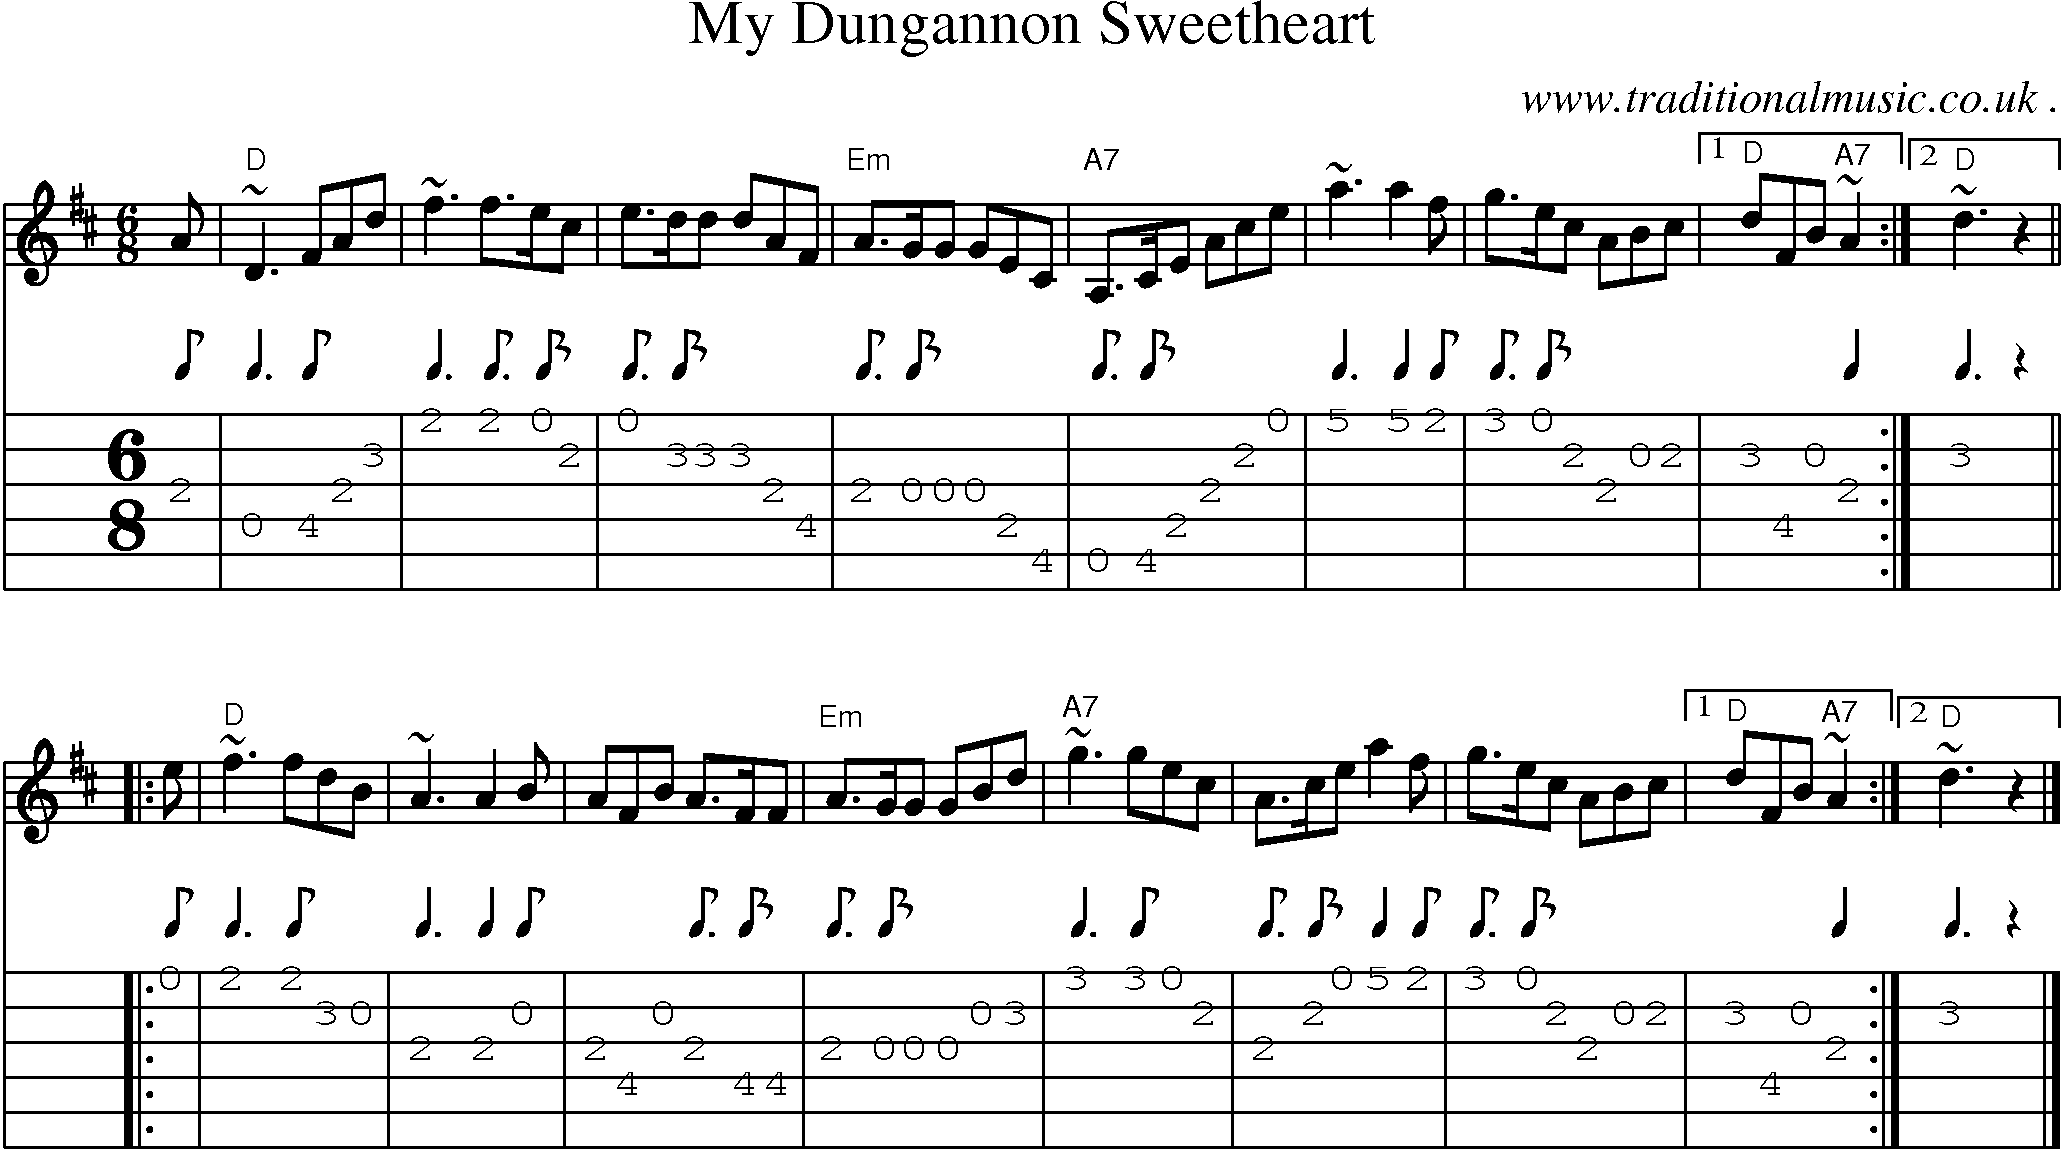 Sheet-music  score, Chords and Guitar Tabs for My Dungannon Sweetheart